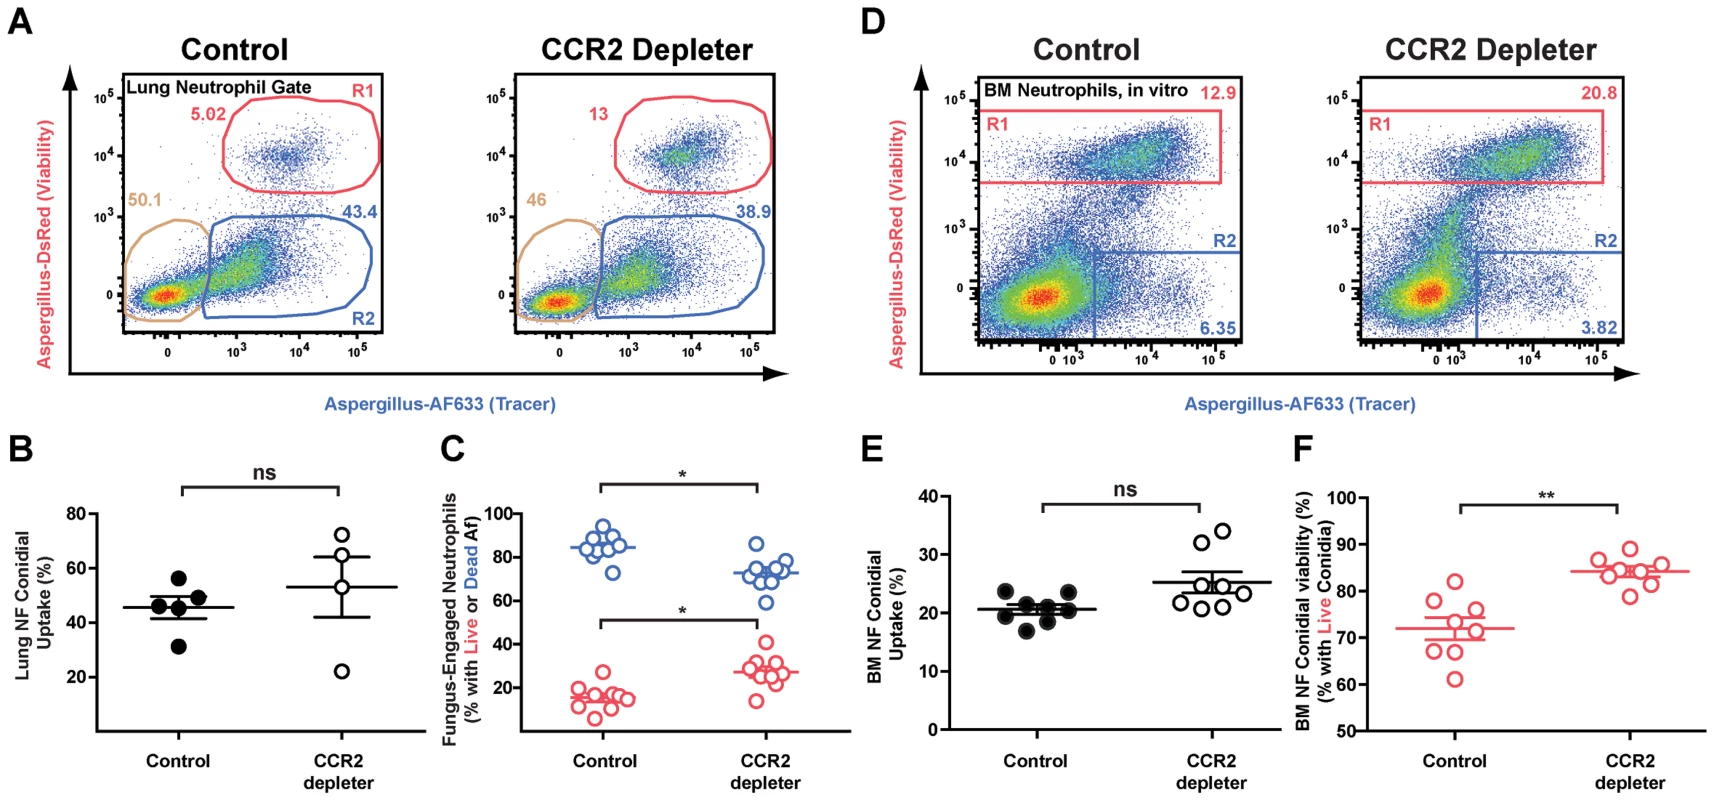 Diminished neutrophil conidiacidal activity in CCR2 depleter mice.